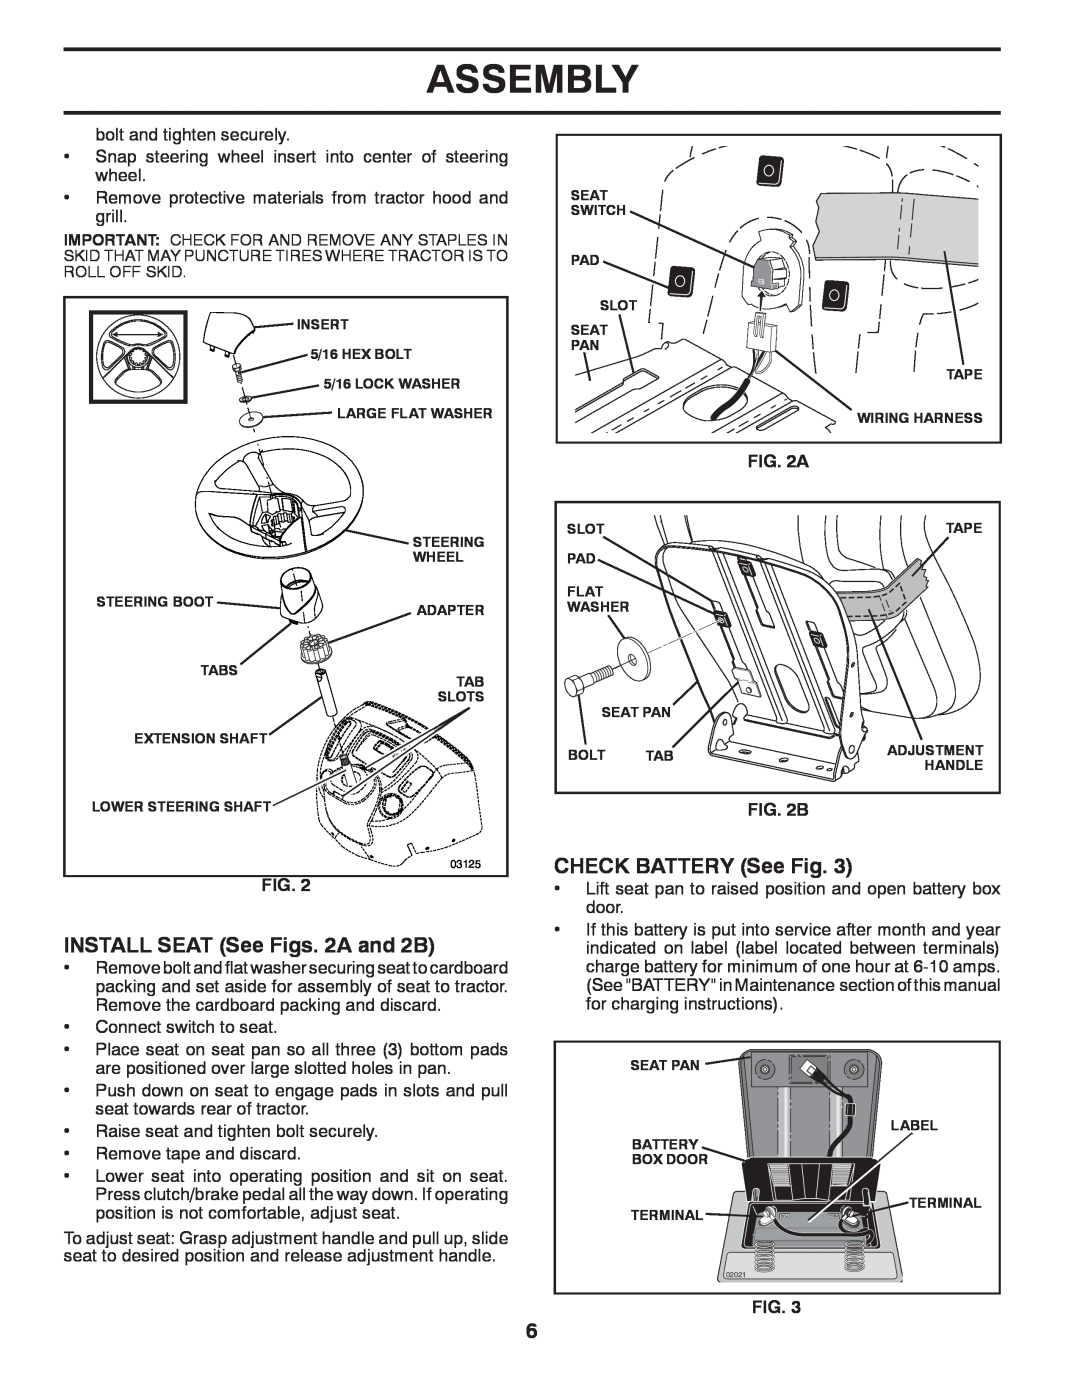 Husqvarna LT1597 manual INSTALL SEAT See Figs. 2A and 2B, CHECK BATTERY See Fig, Assembly 